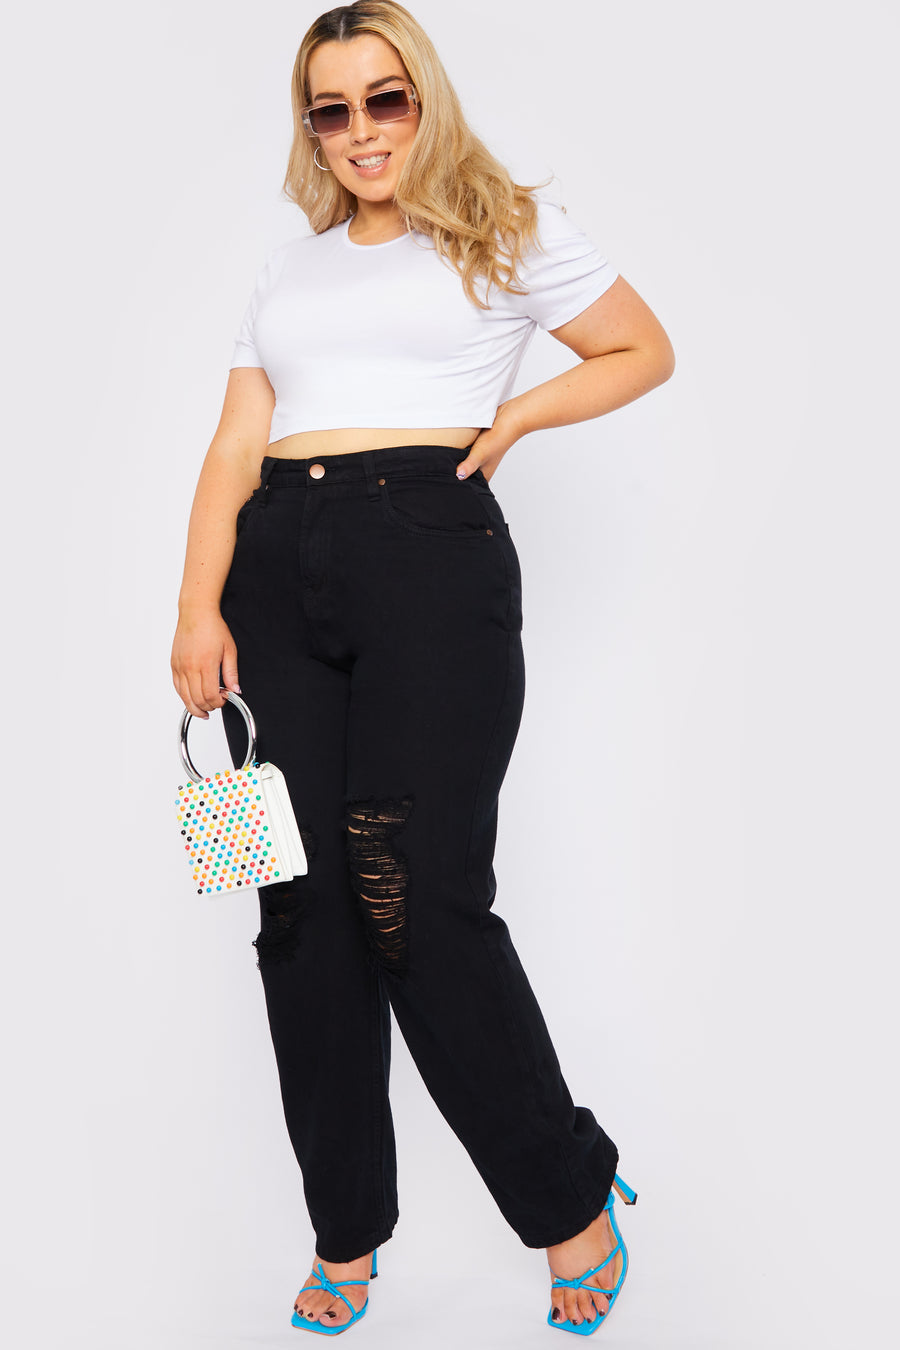 Full body style shot of a standing female plus size model wearing JMOJO Black High Waisted Straight Leg Ripped Jeans holding a handbag and wearing sunglasses